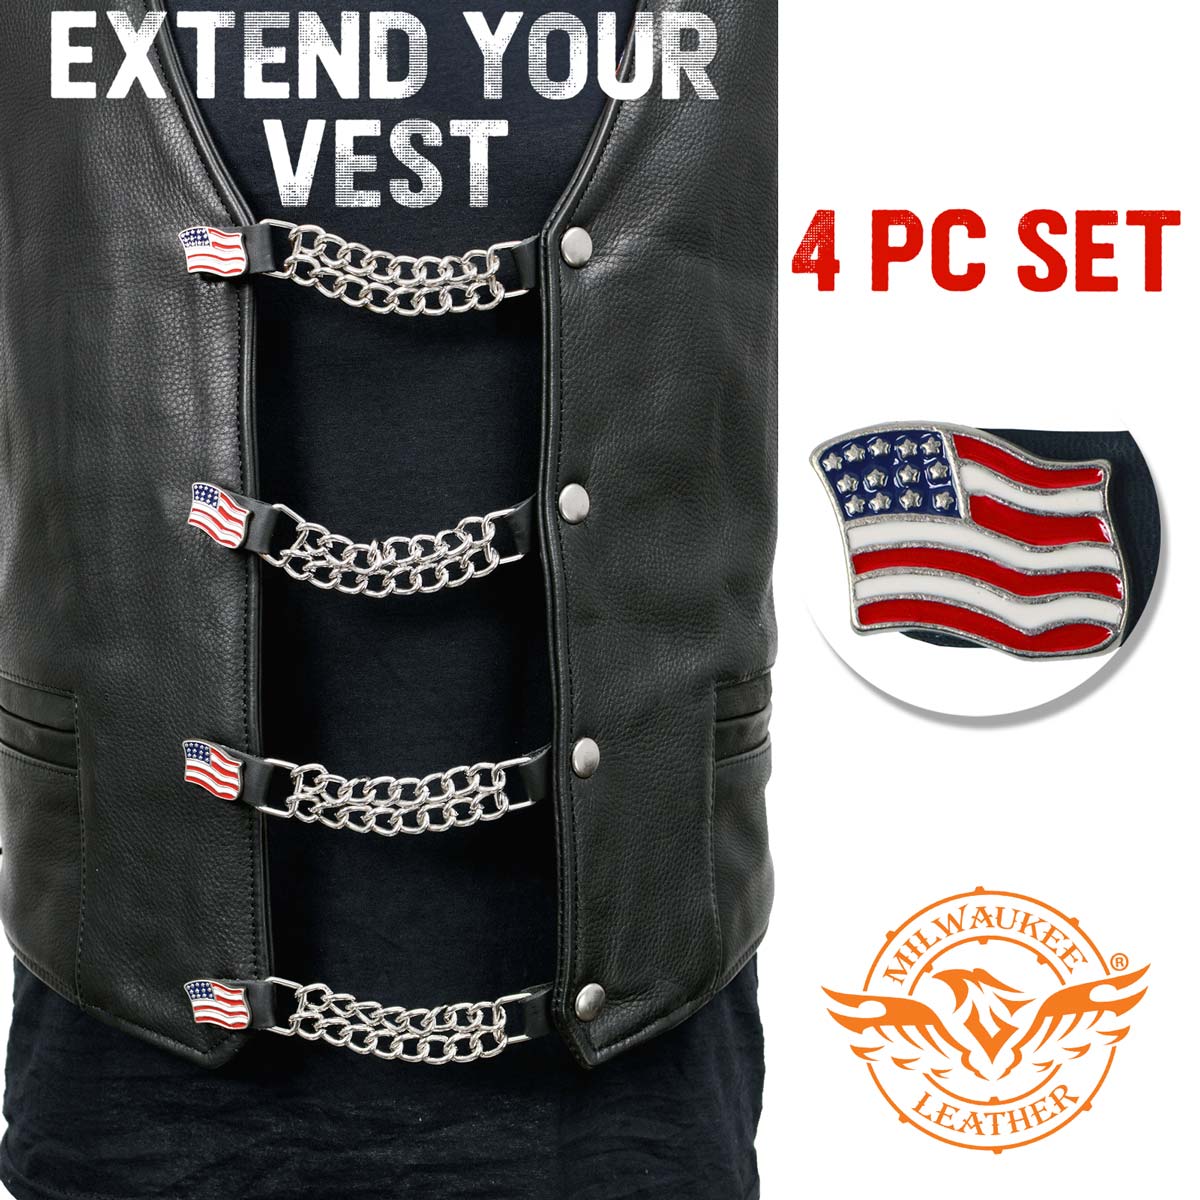 Milwaukee Leather American Flag Vest Extender - Double Chrome Chains Genuine Leather 6.5" Extension 4-PCS MLA6008SET